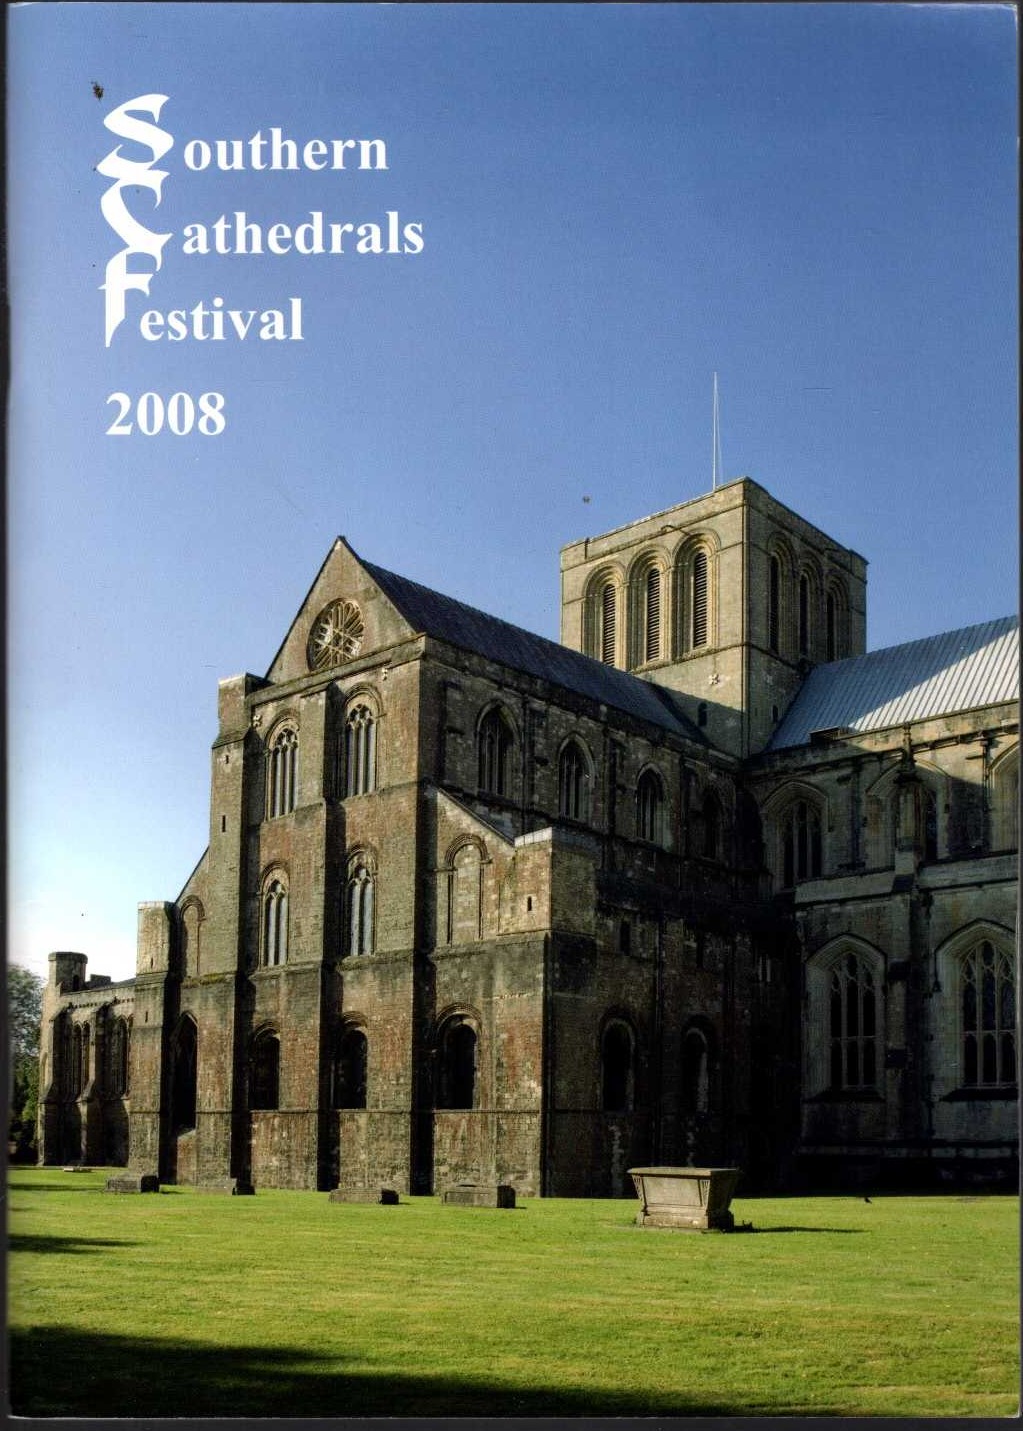 SOUTERN CATHEDRALS FESTIVAL 2008 by Anonymous front book cover image